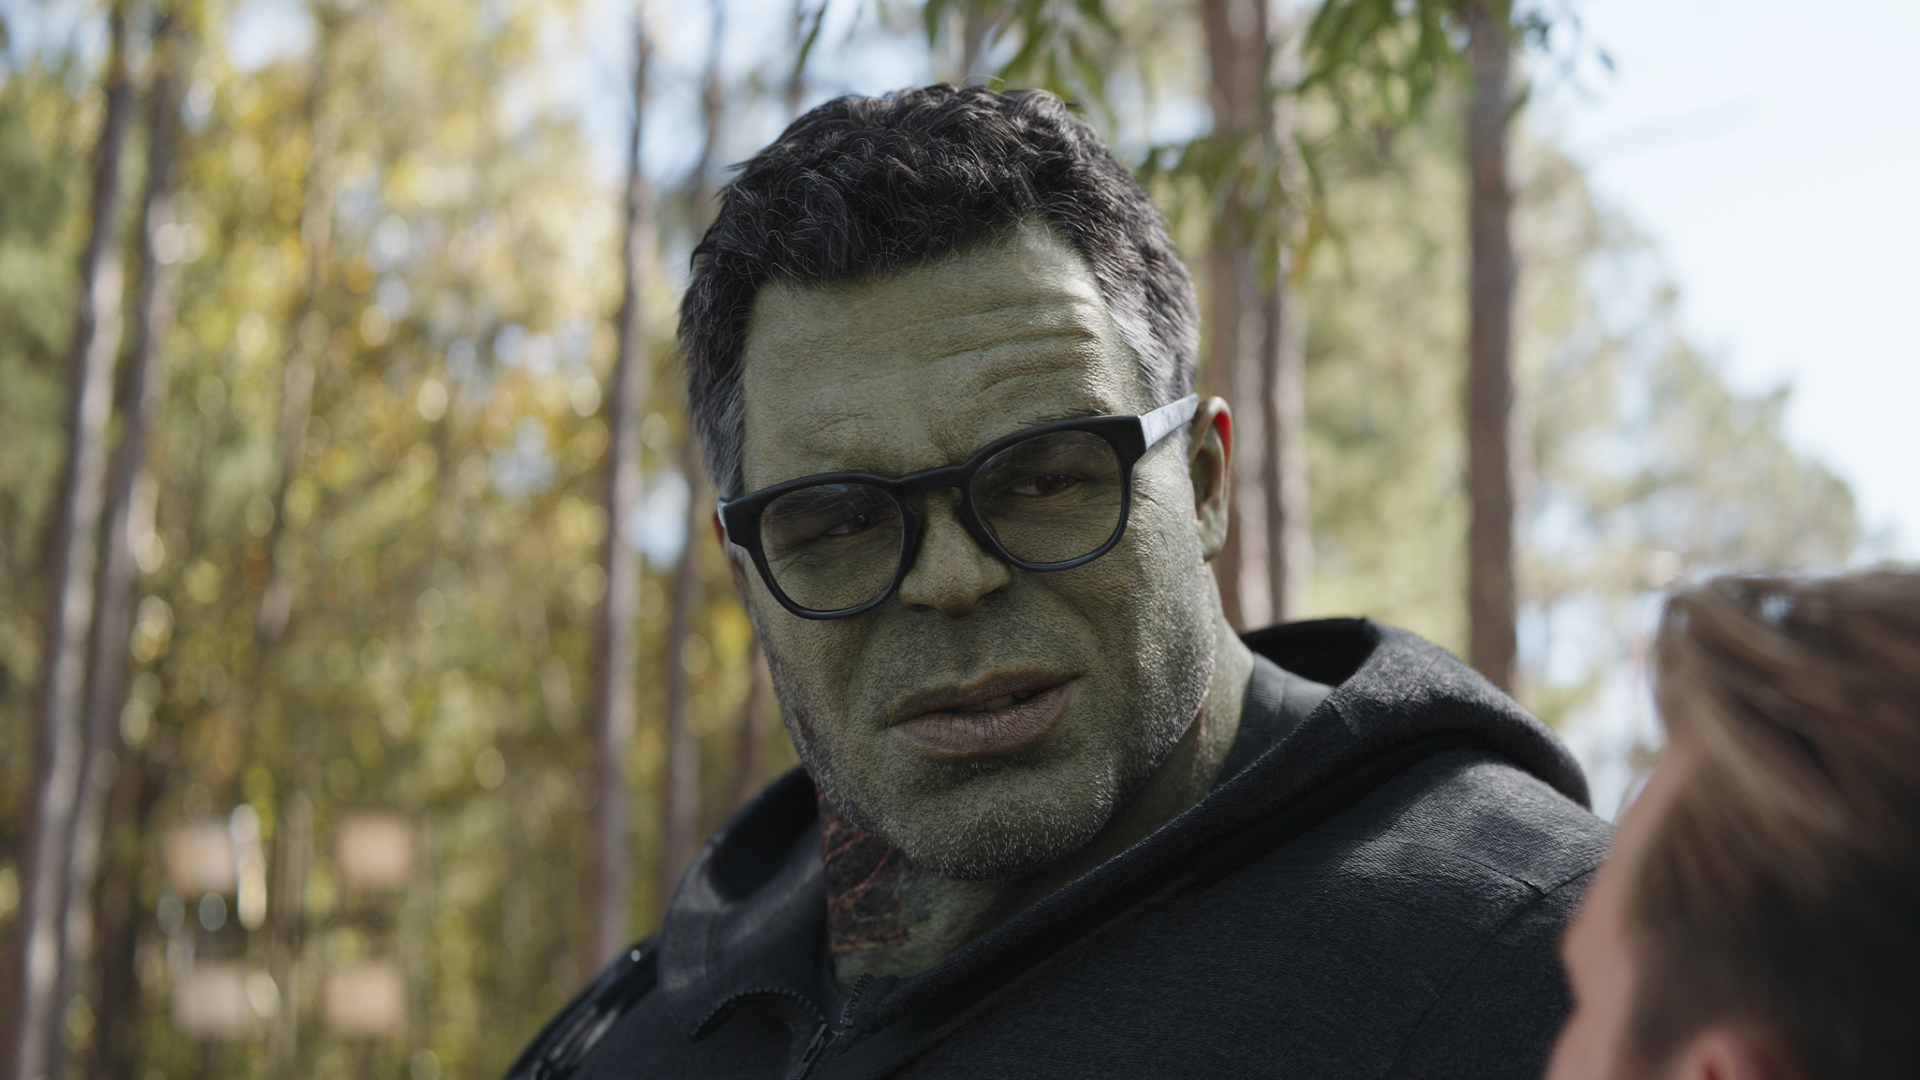 ILM Artists imbue Hulk with Mark Ruffalo’s essence bringing even the most minute performance details to the CG Character. © Disney/Marvel. All Rights Reserved.